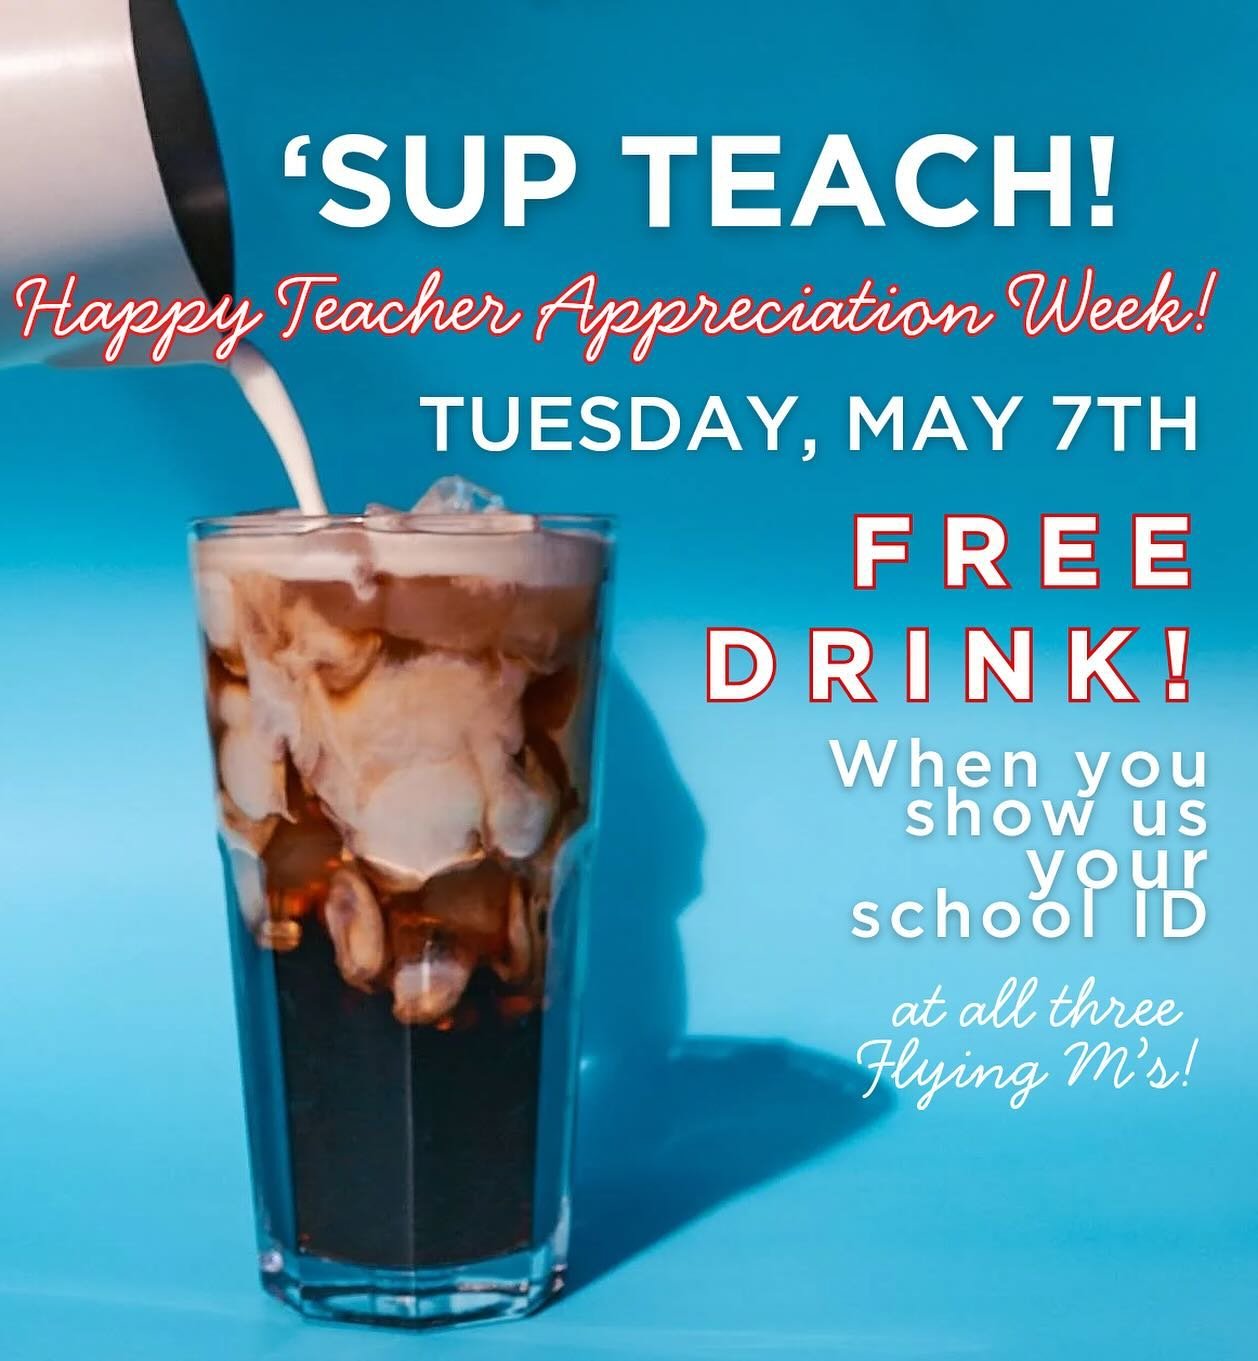 Calling all teachers &amp; educators, come into any of the three Flying M&rsquo;s tomorrow for a free espresso drink by showing your ID! We appreciate you!! 💘 #flyingm #downtownboise